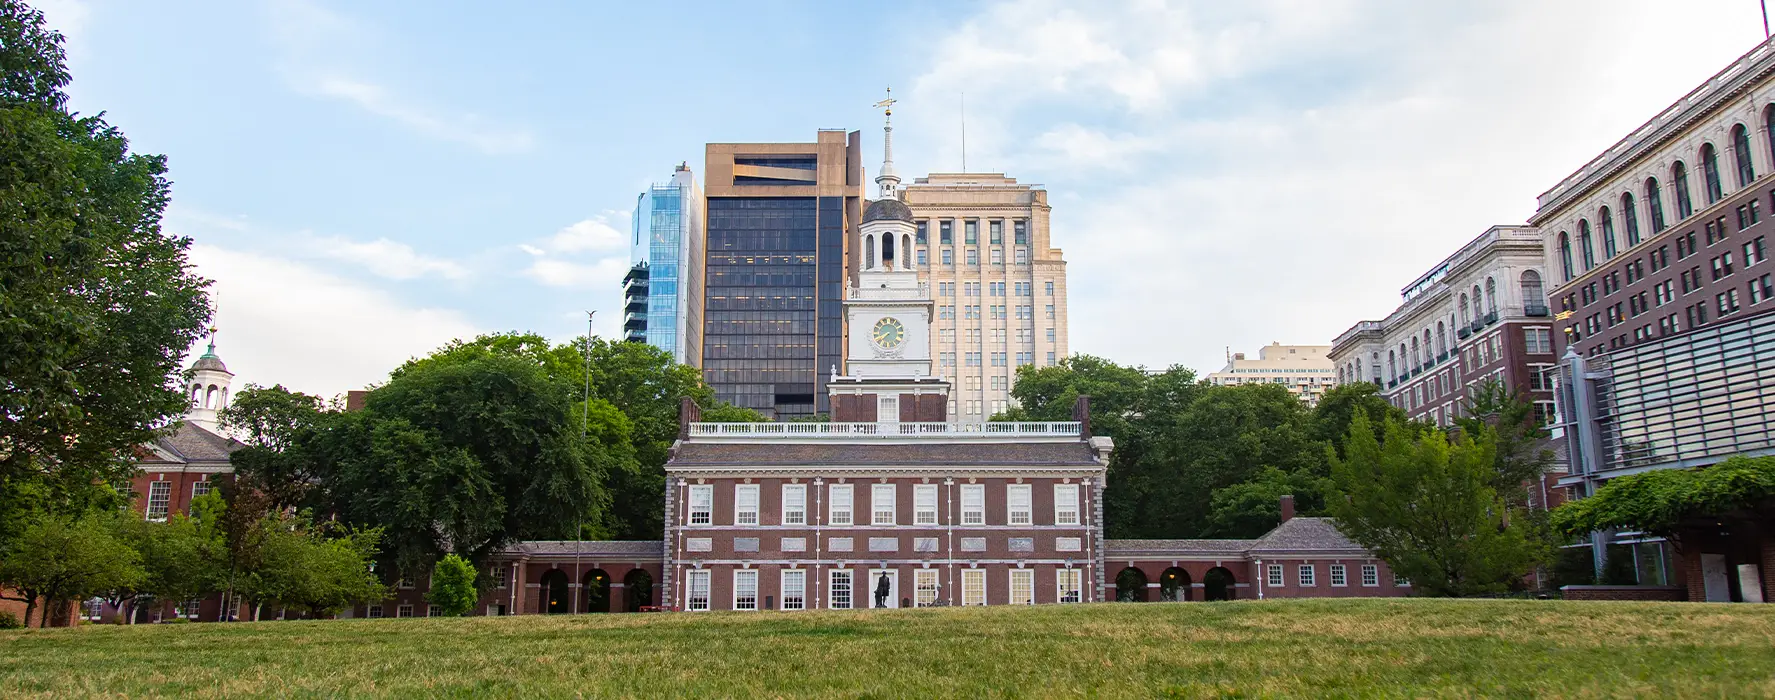 A photo of Independence Hall in Philadelphia.